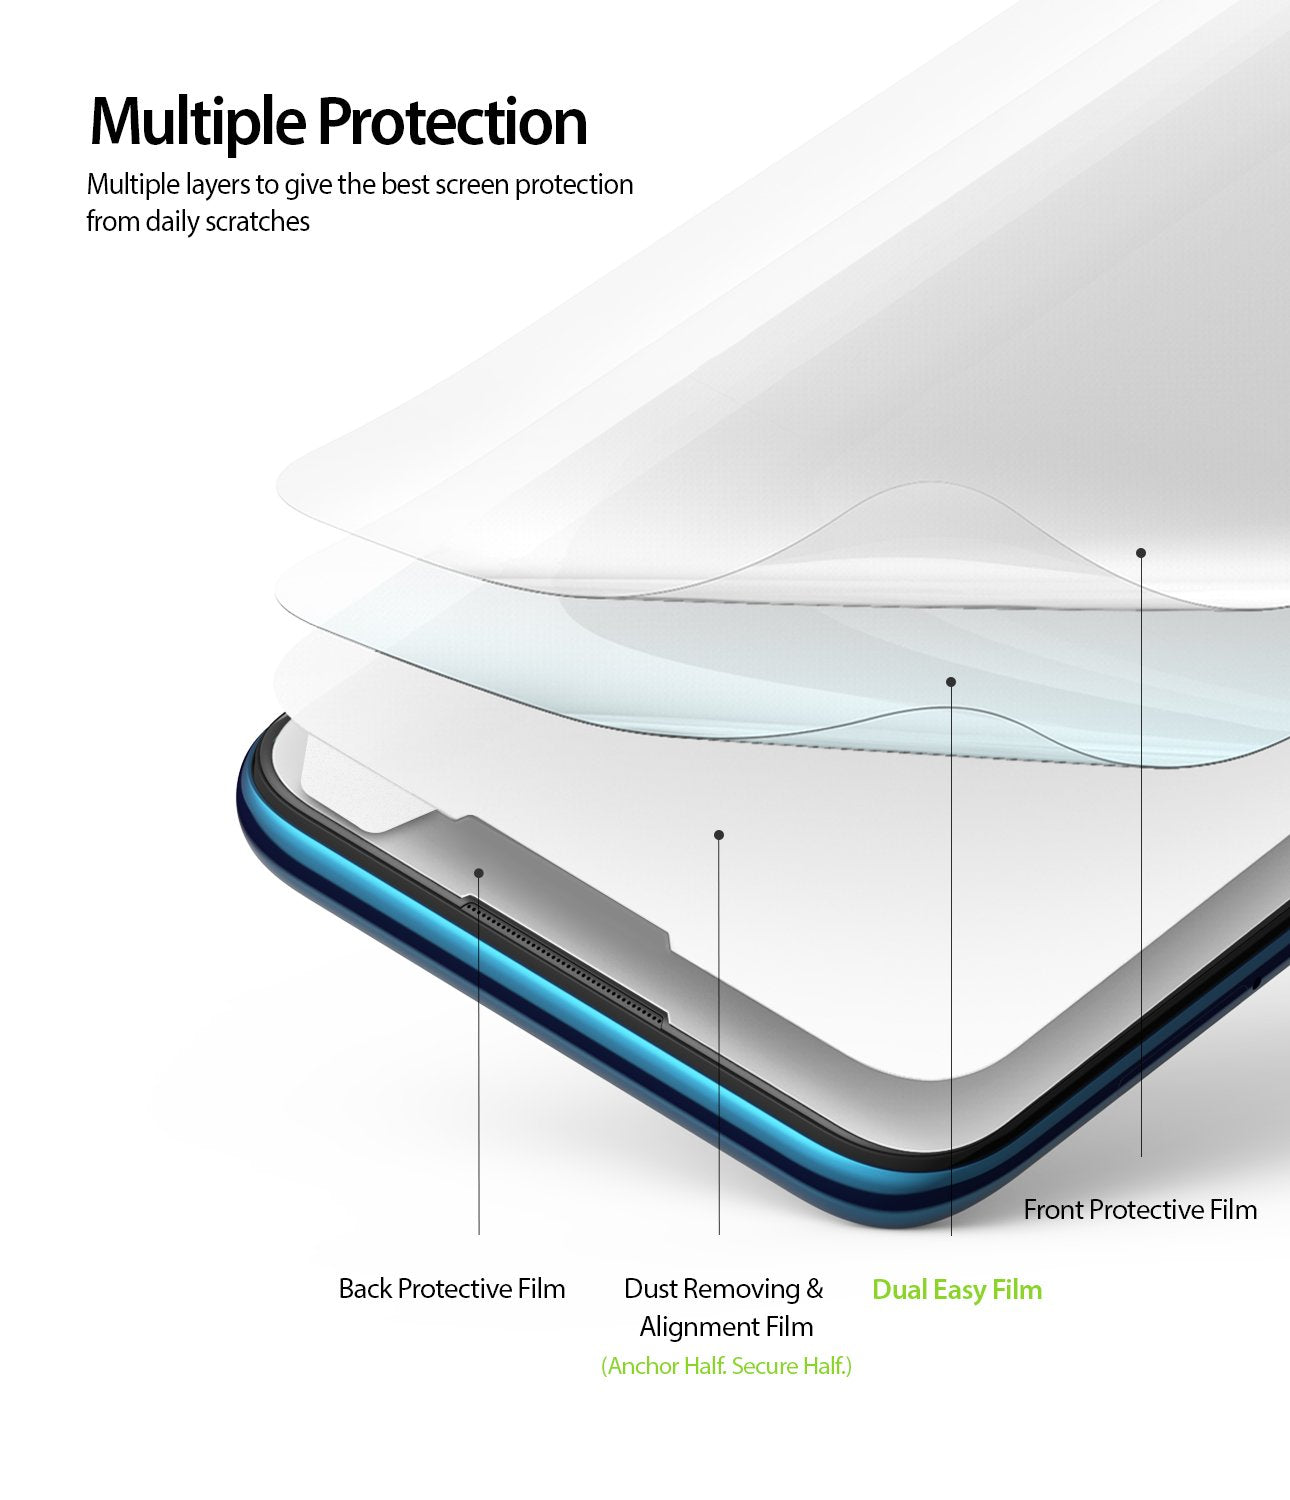 multiple protection to give best screen protection from daily scratches